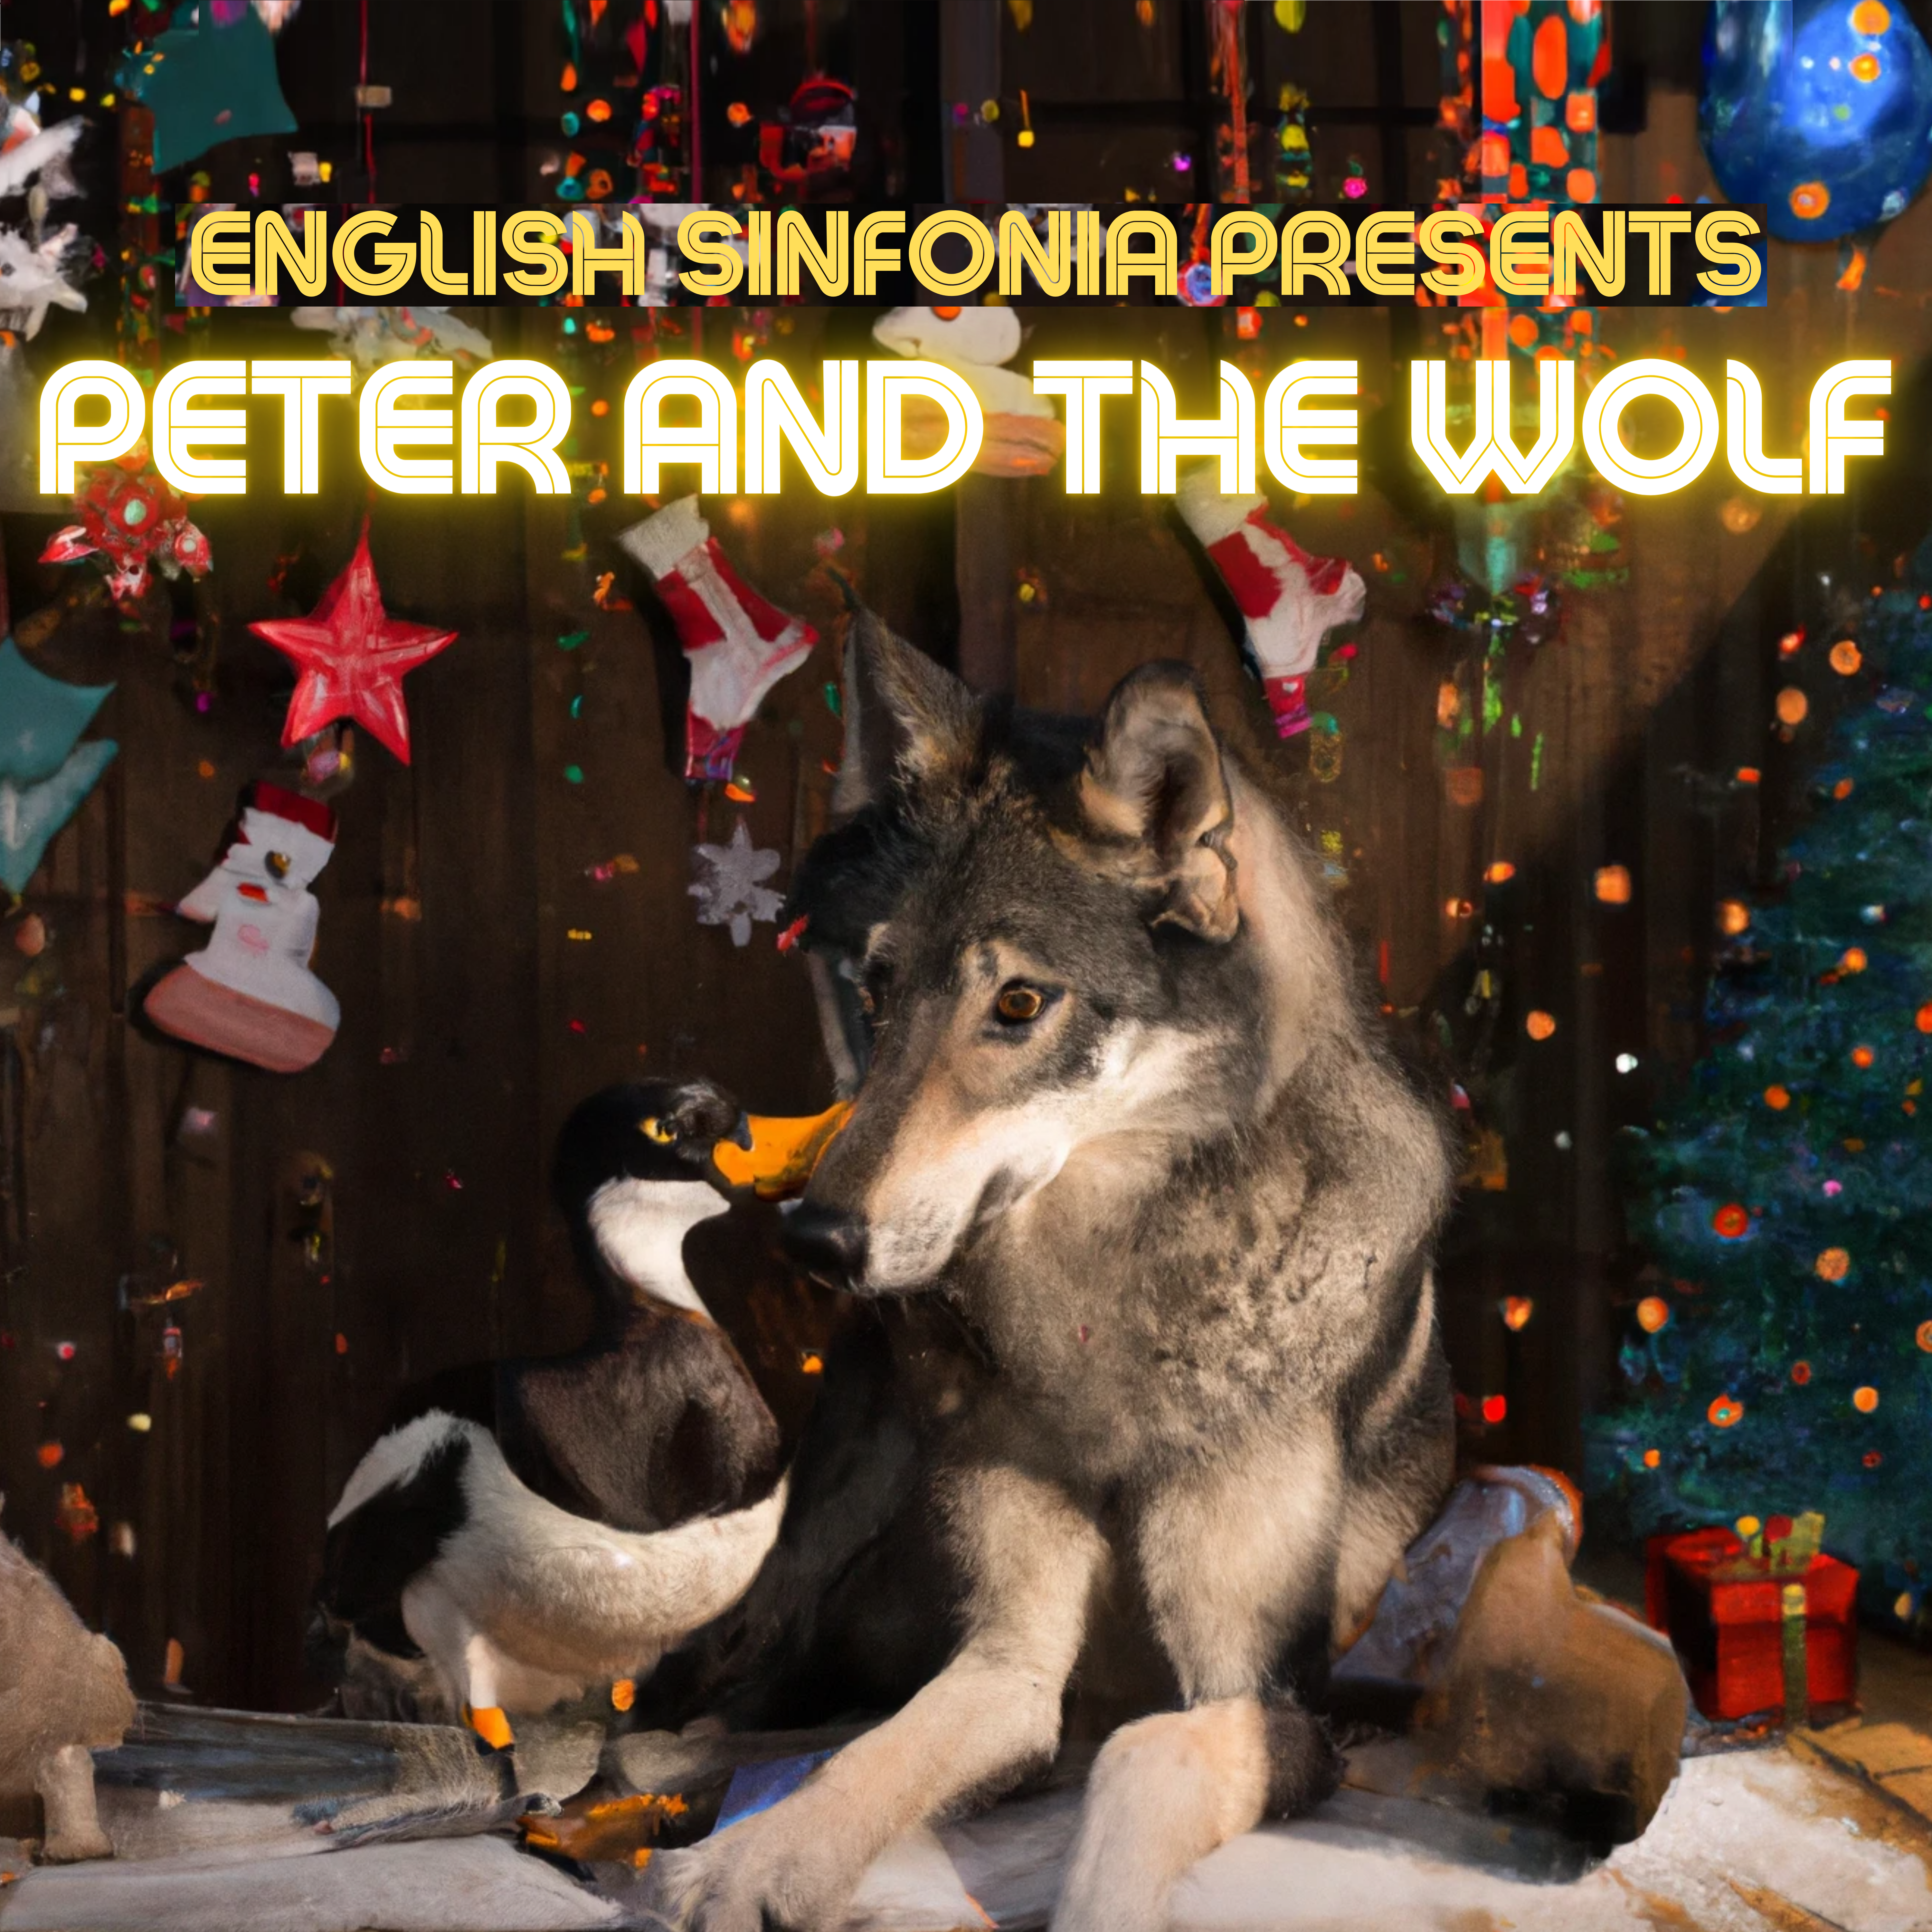 Peter and the Wolf from the English Sinfonia